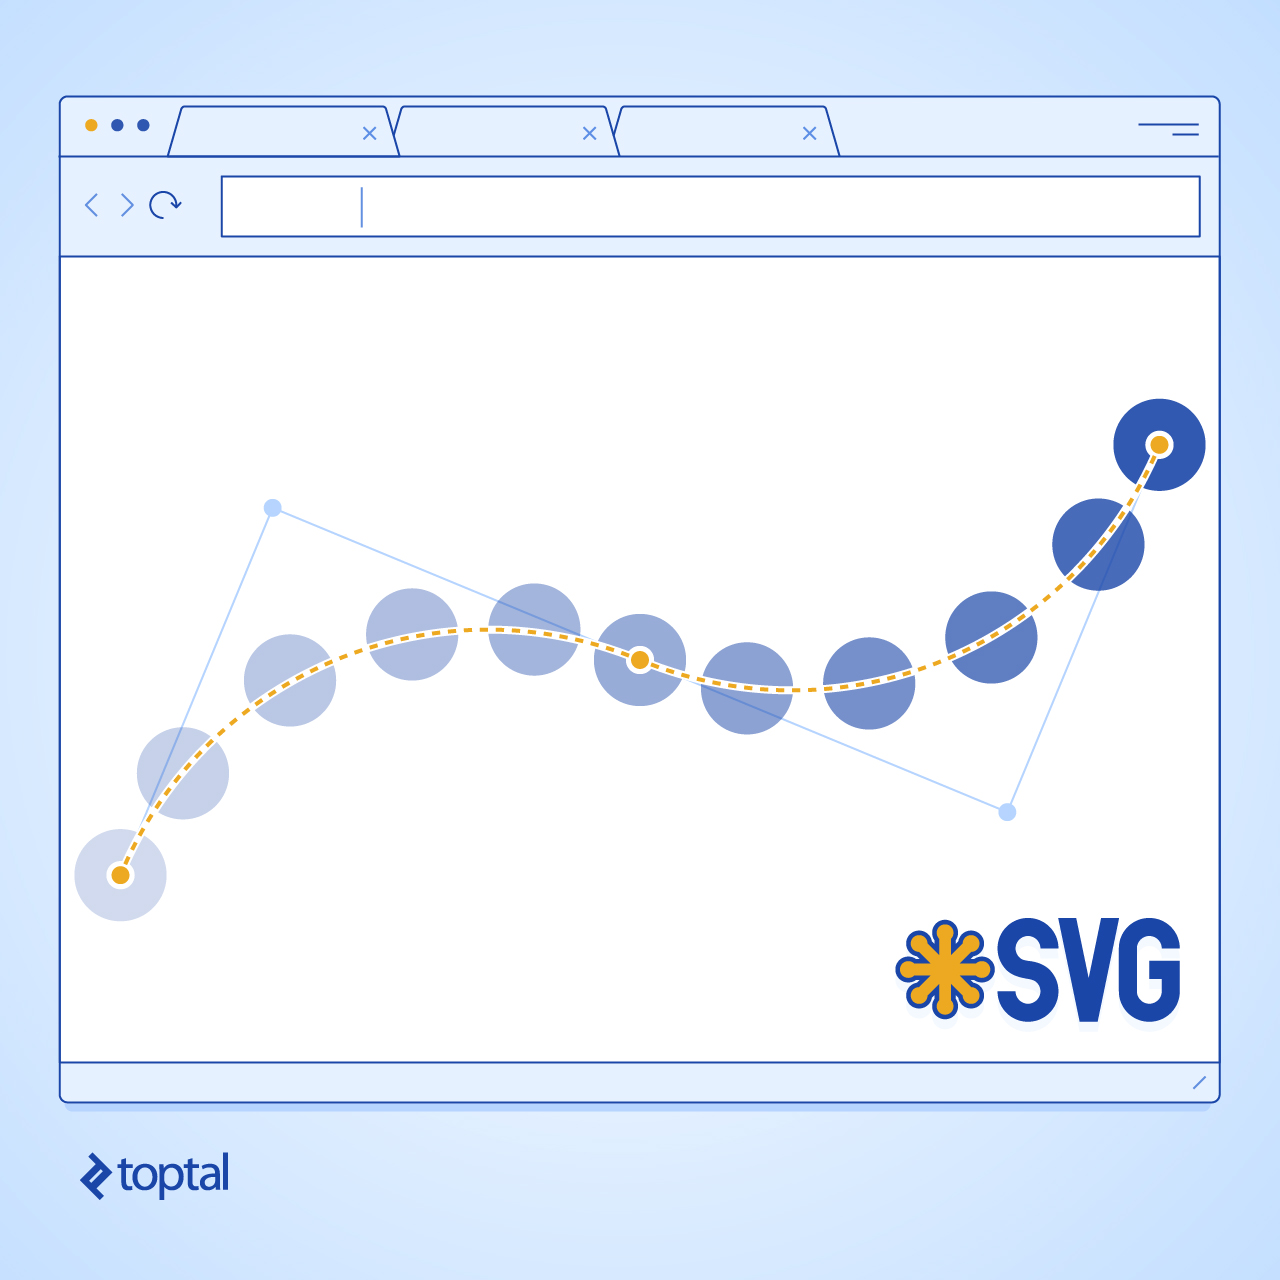 svg animation free download